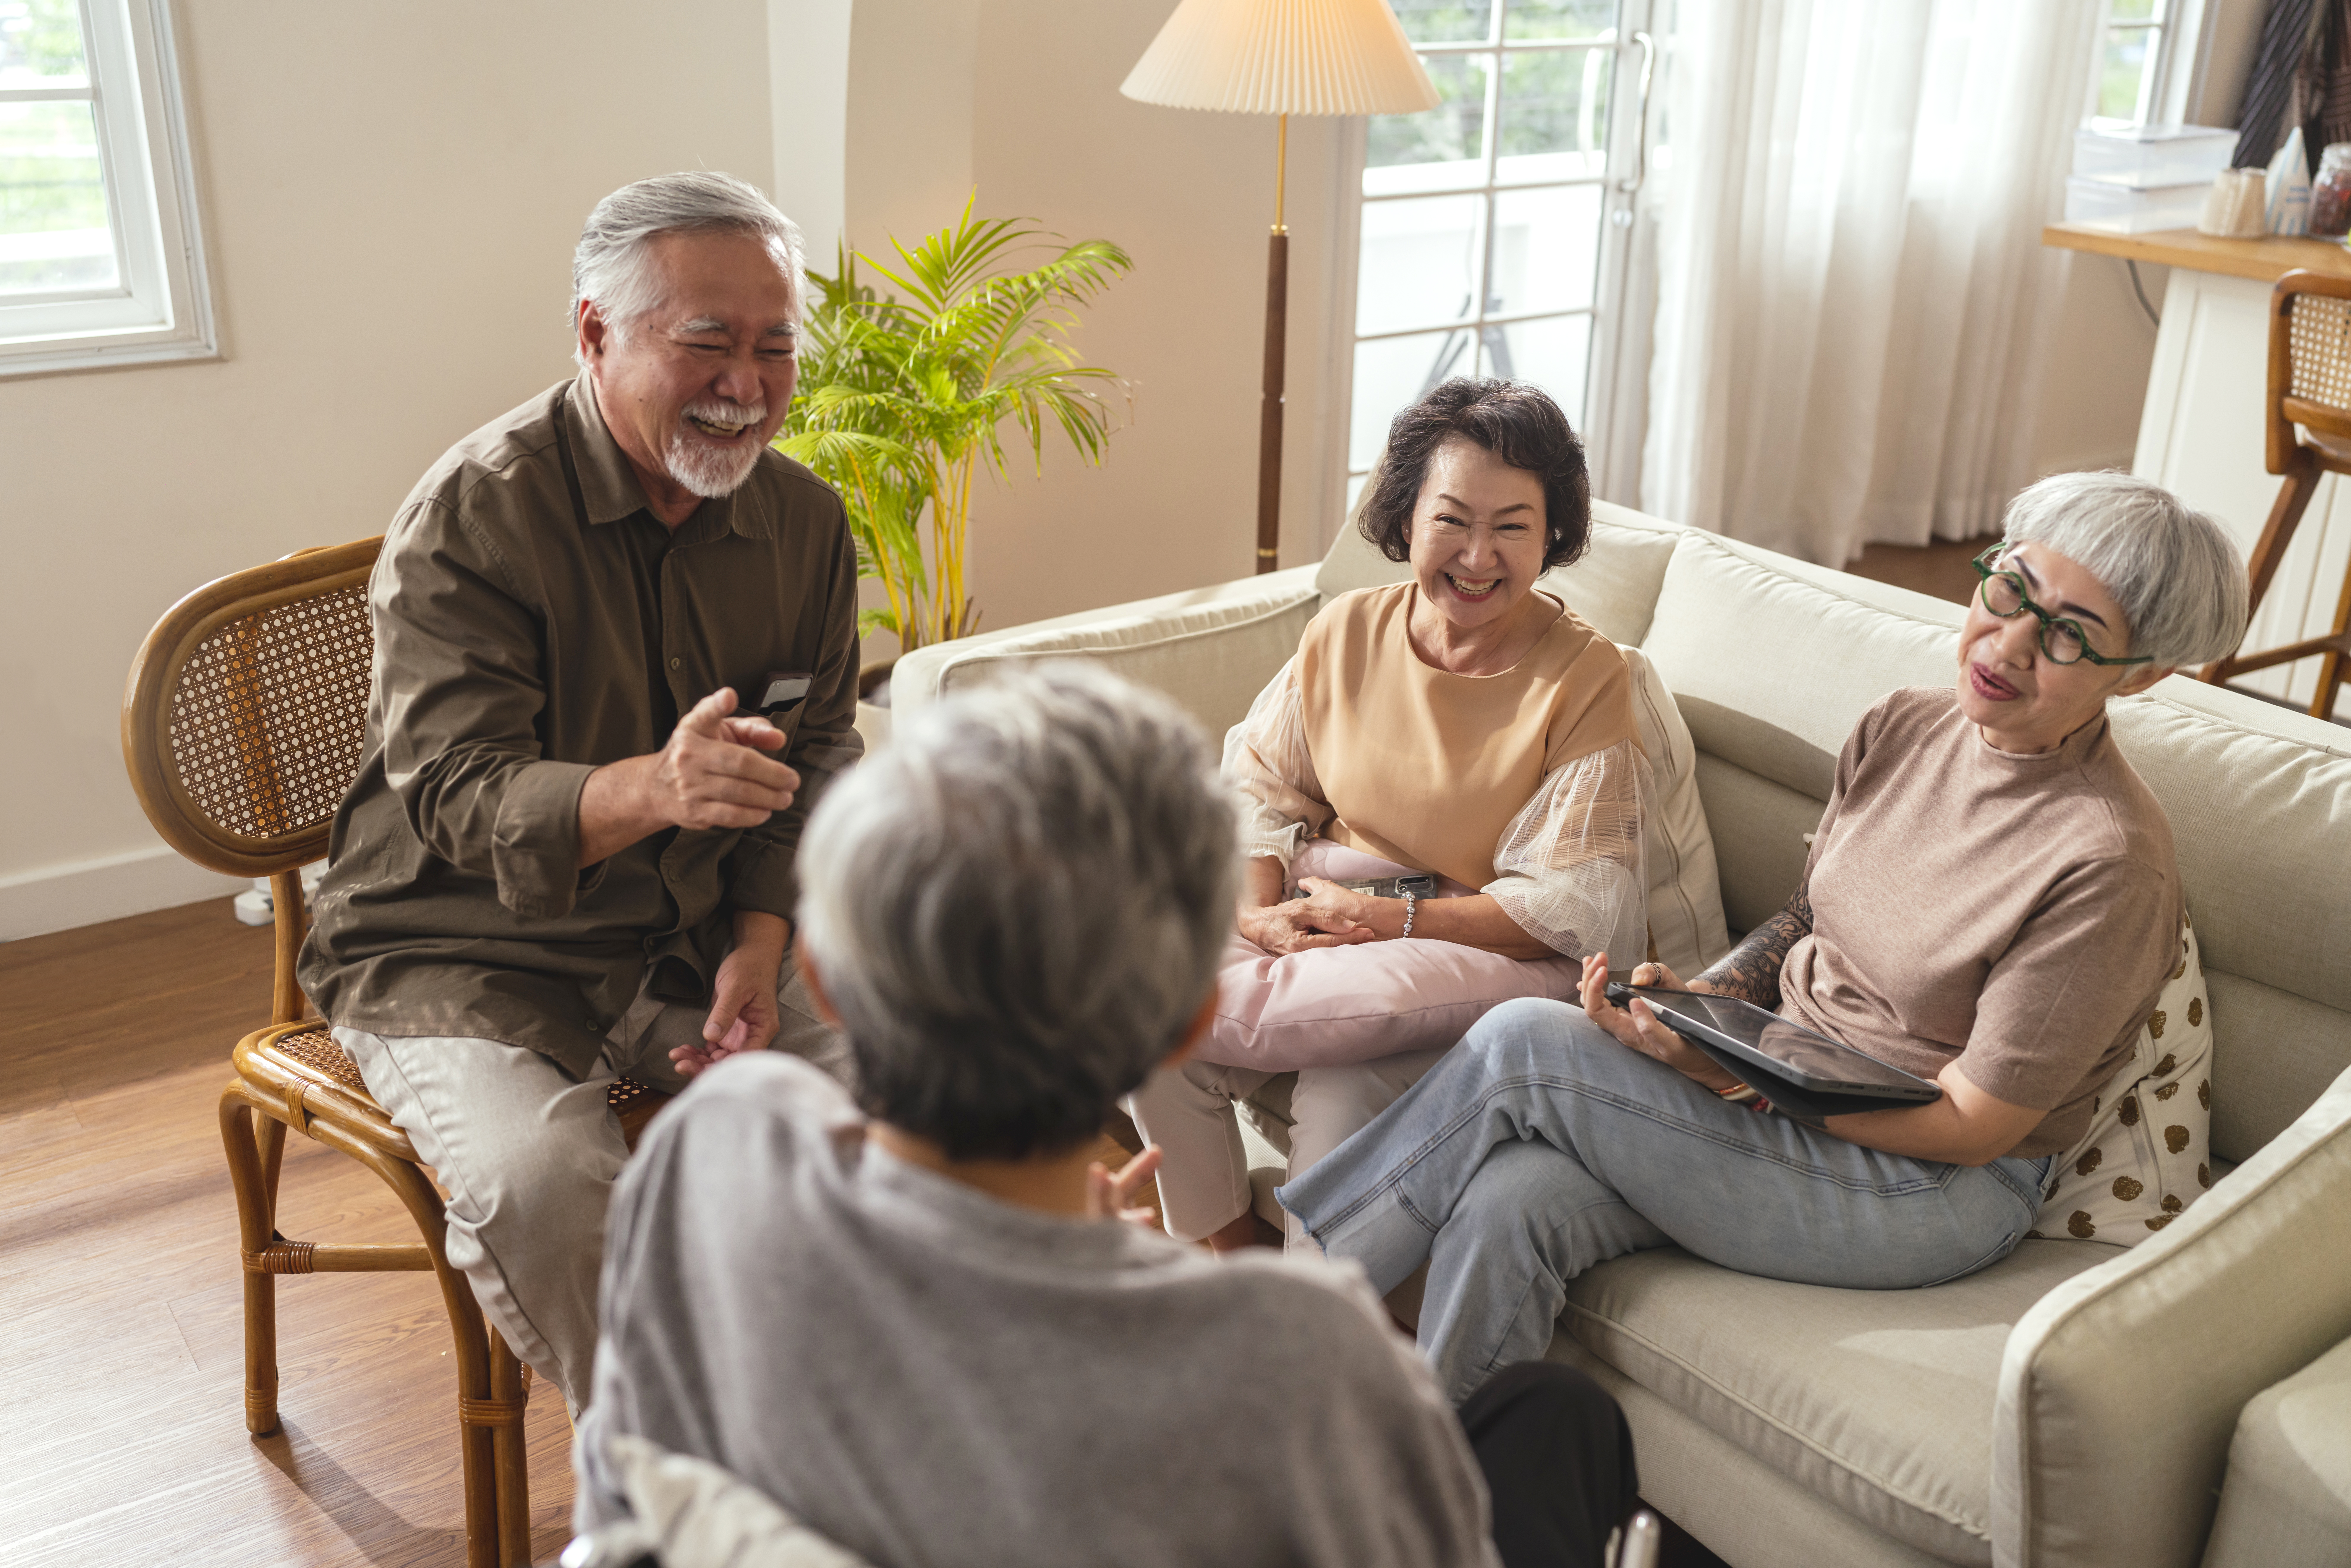 6 Important Features to Look for in a Senior Living Community